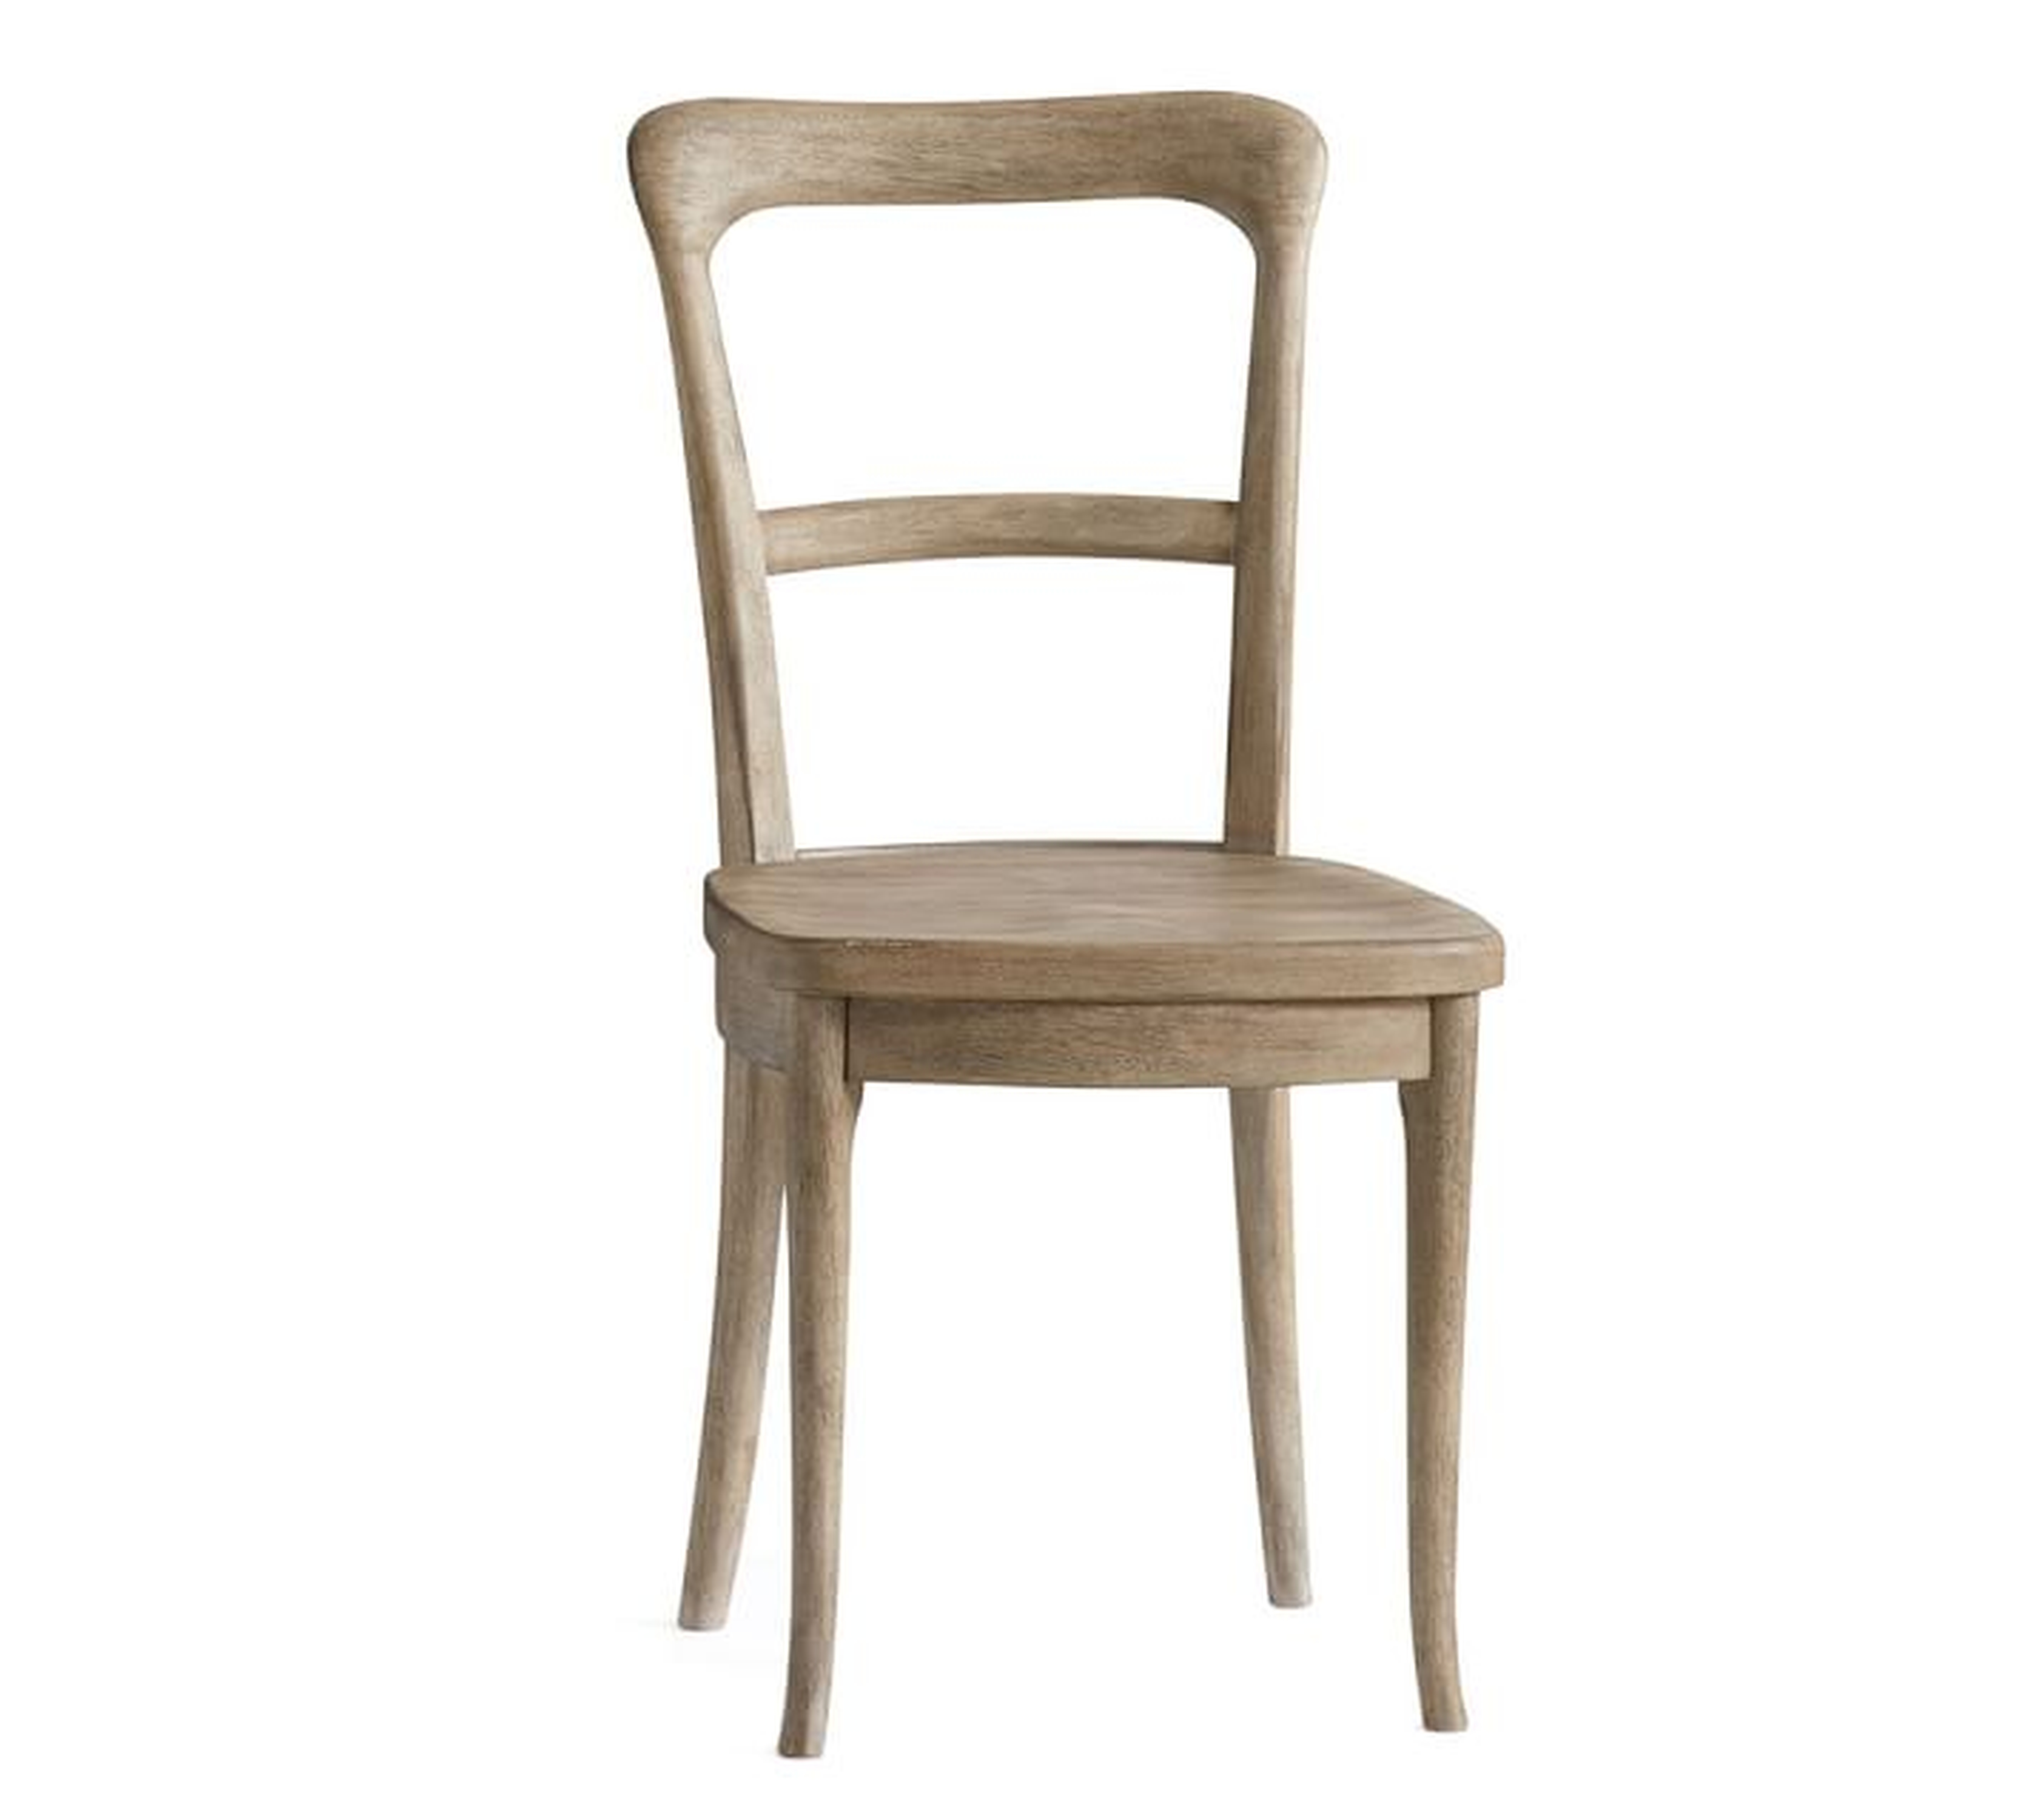 CLINE DINING CHAIRS - Pottery Barn